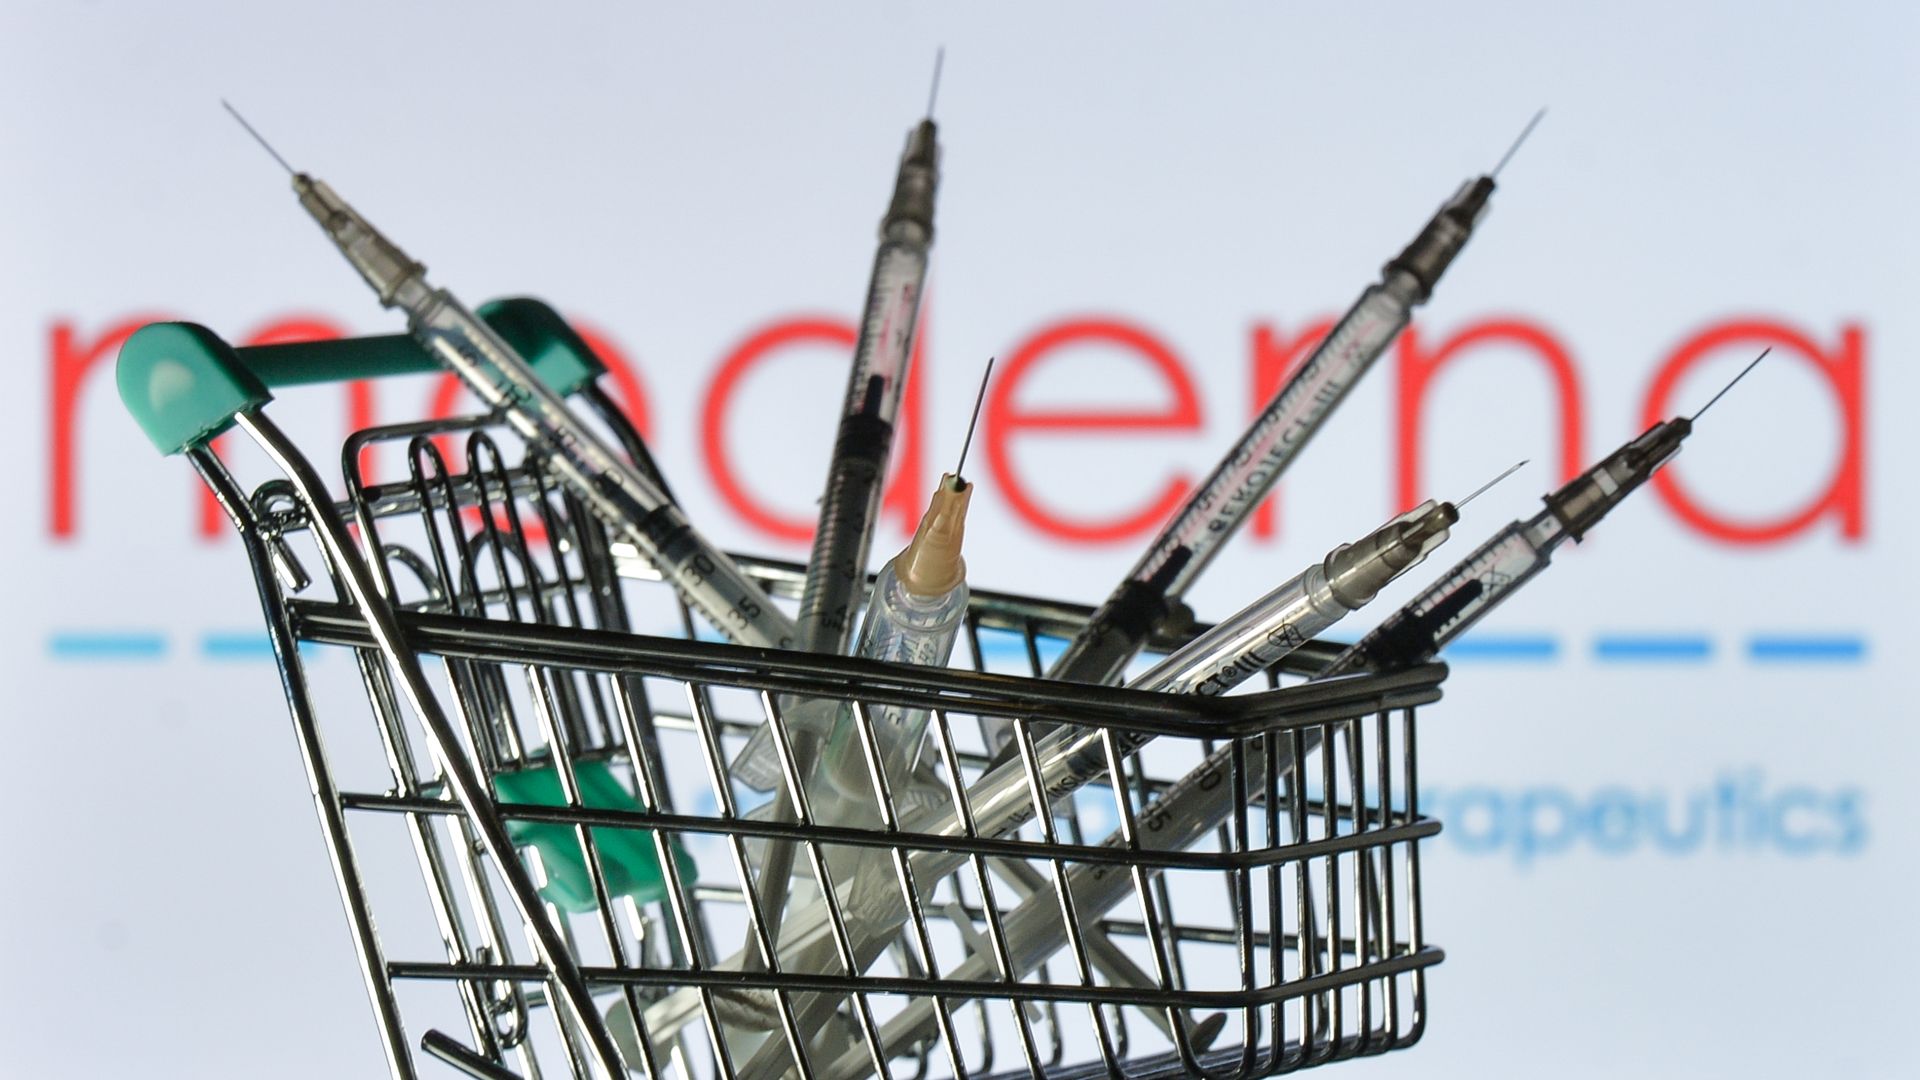 Medical syringes in the mini shopping trolley are seen in front of the Moderna logo displayed on a screen.